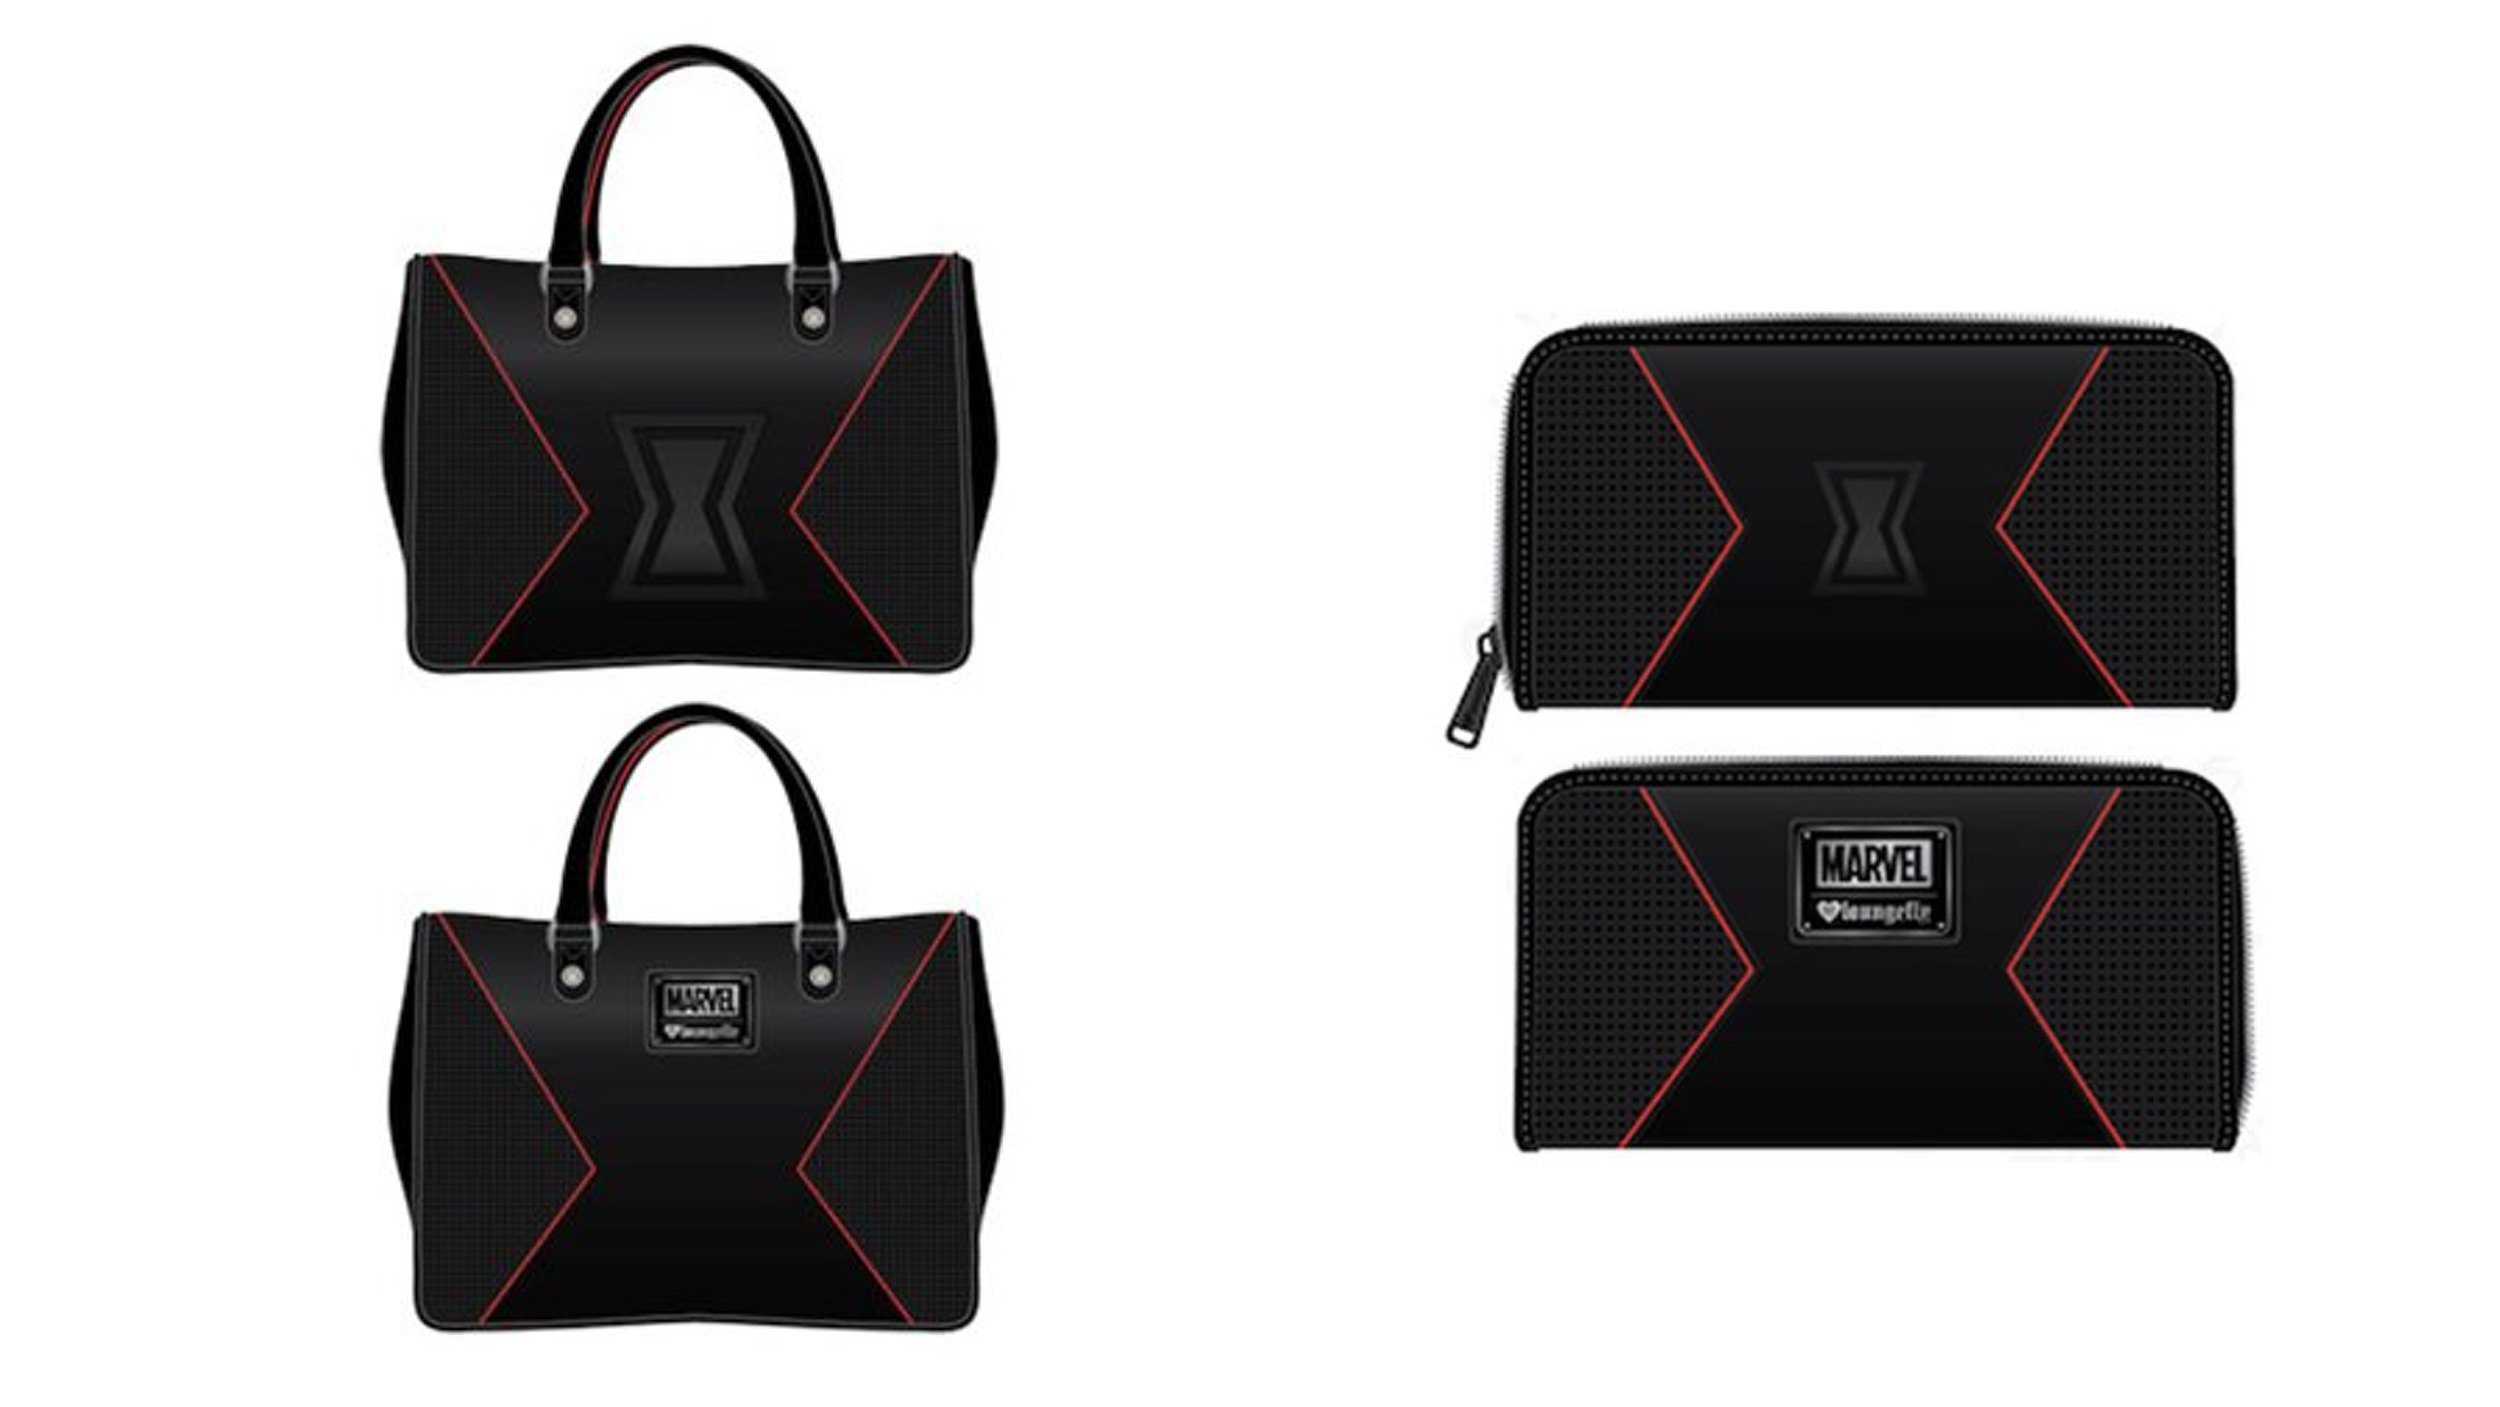 vamers-geekosphere-lifestyle-fashion-these-gorgeous-loungefly-bags-are-inspired-by-marvel-heroines-loungefly-bag-and-purse-inspired-by-black-widow